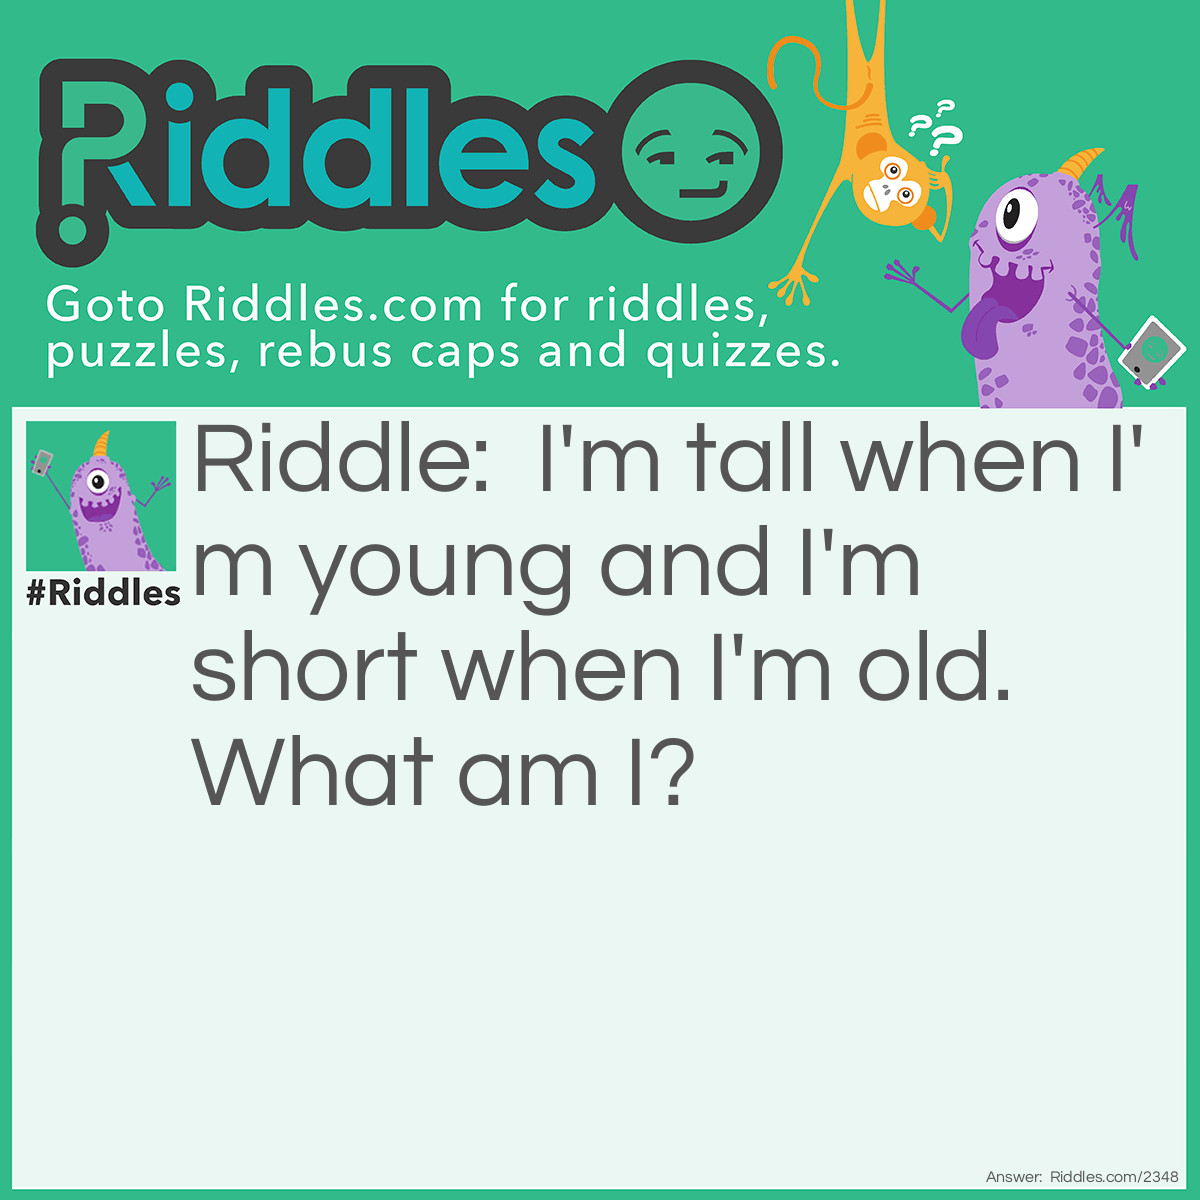 Riddle: I'm tall when I'm young and I'm short when I'm old. What am I? Answer: A candle or a pencil.